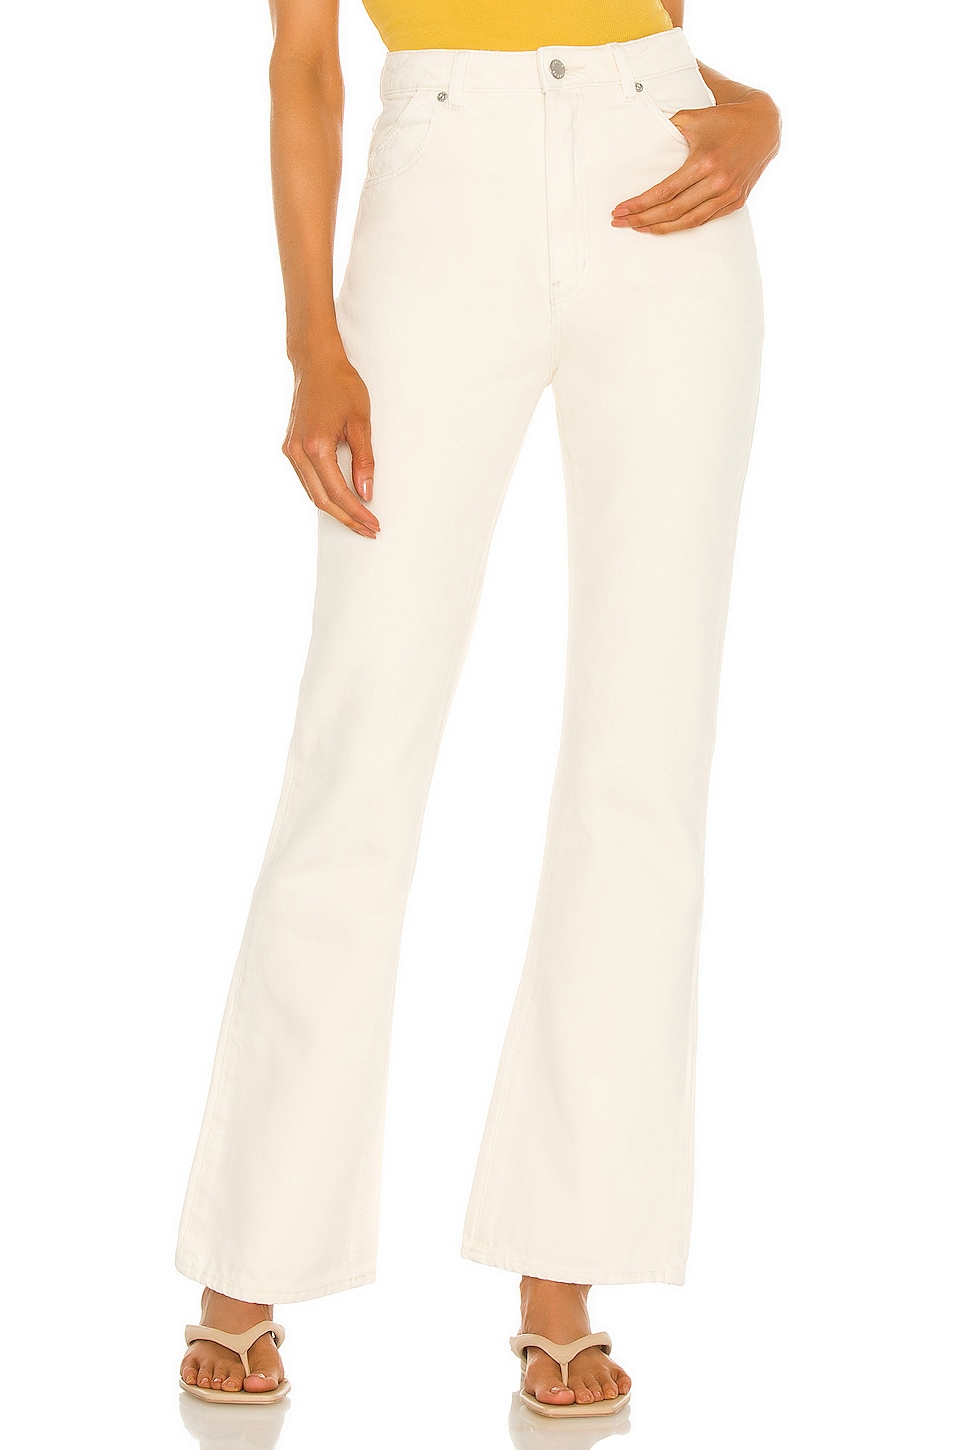 ROLLA'S Dusters Bootcut Jean in Moonstone | REVOLVE